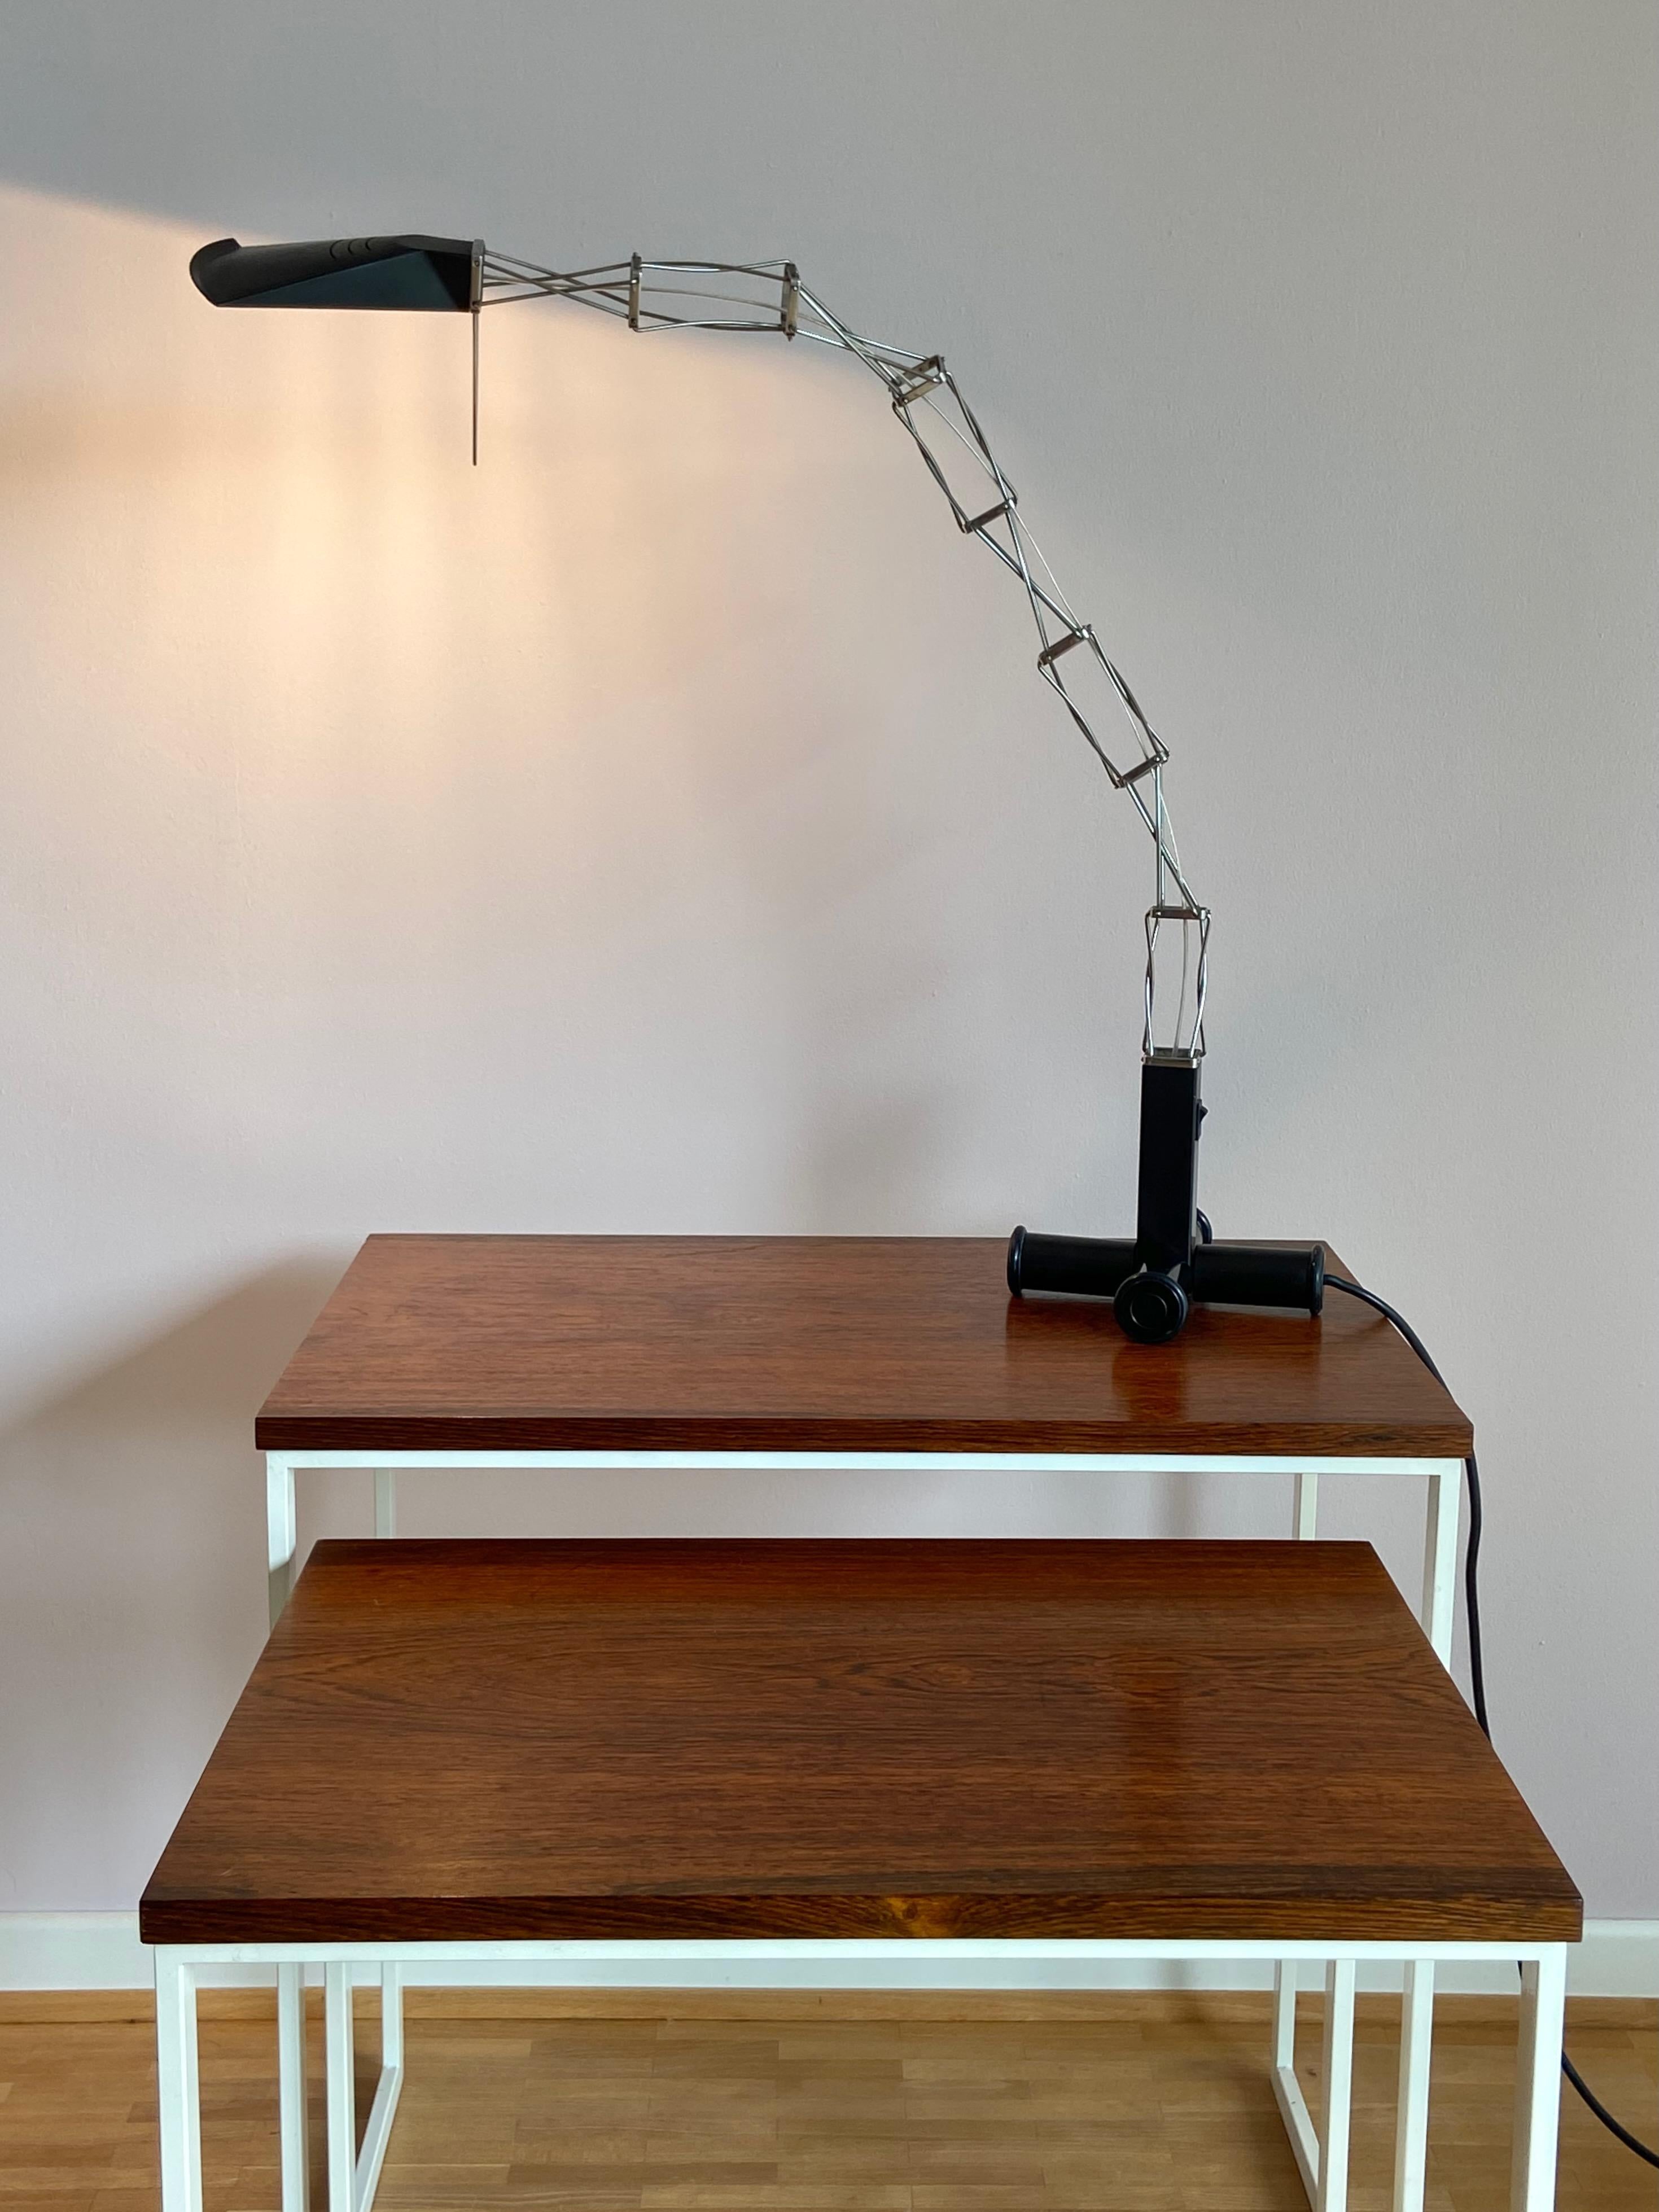 Nice vintage Multi X table lamp Design by Yaacov Kaufman for Lumina lightning Italy. Nice old version with cross base. Arm and shade adjustable. No parts missing, no damages.
Price for one Multi X light, one more available !
